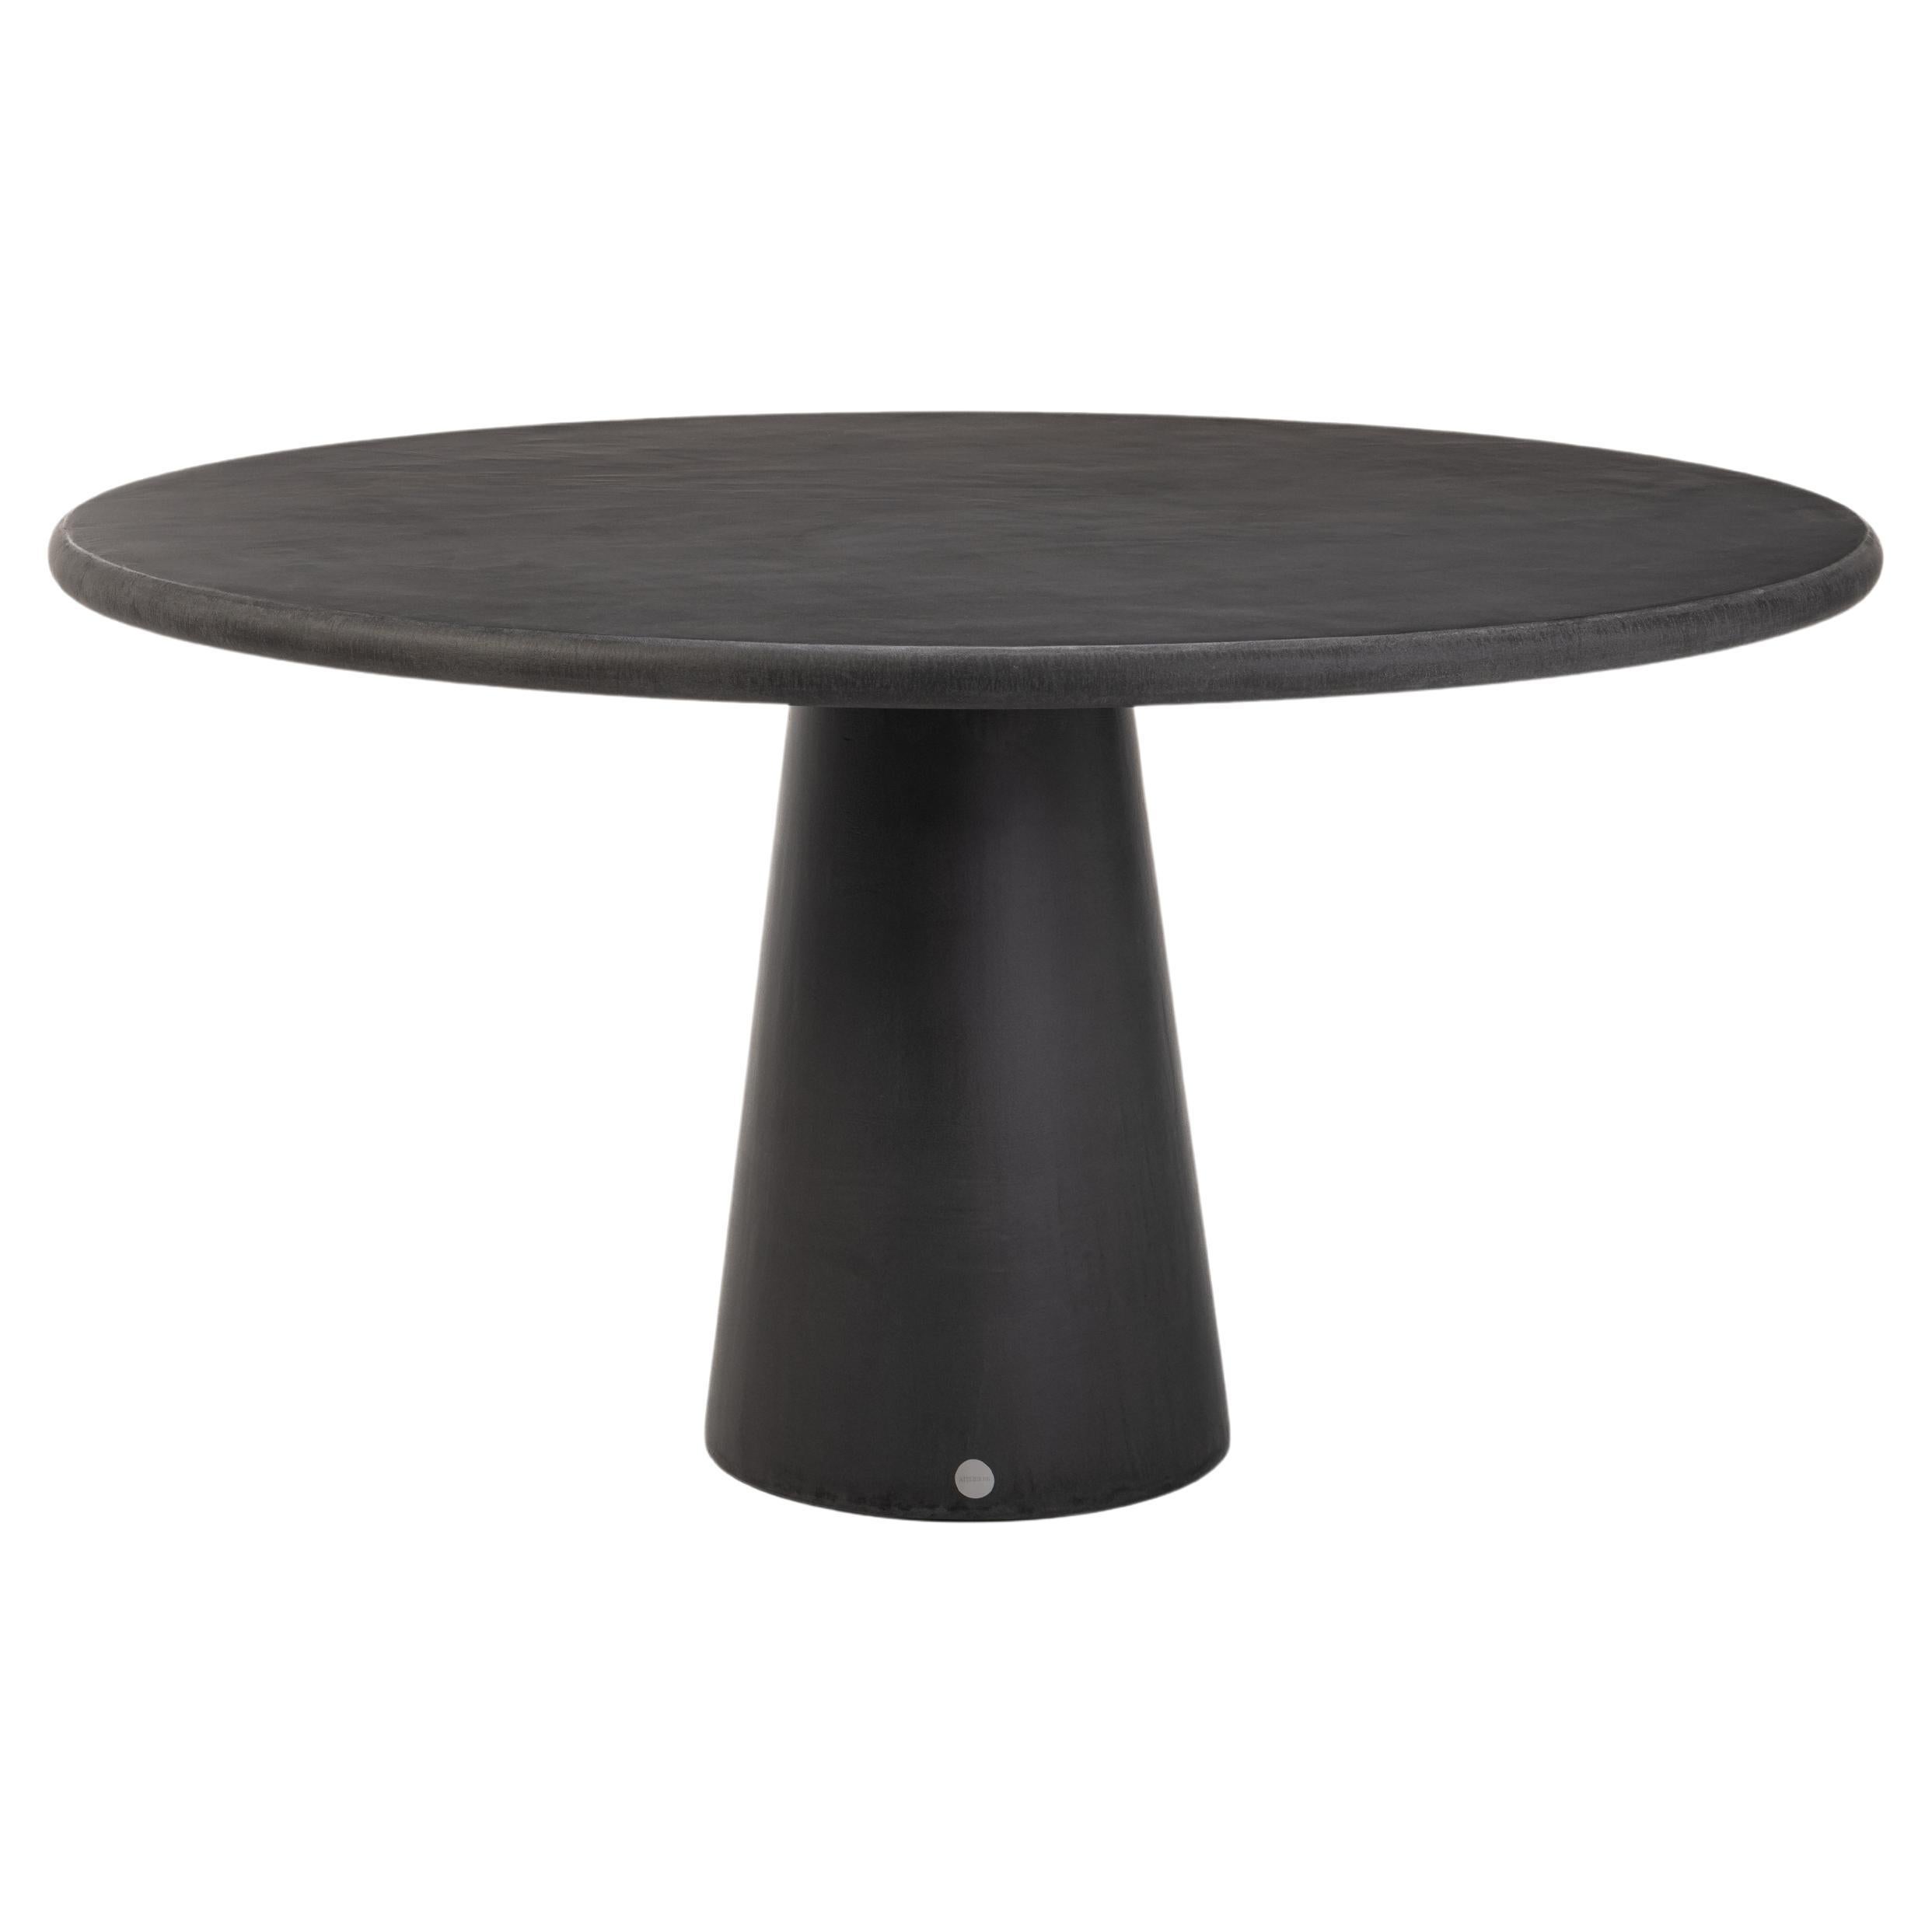 Round Natural Plaster Dining Table "Cone" 120 by Isabelle Beaumont